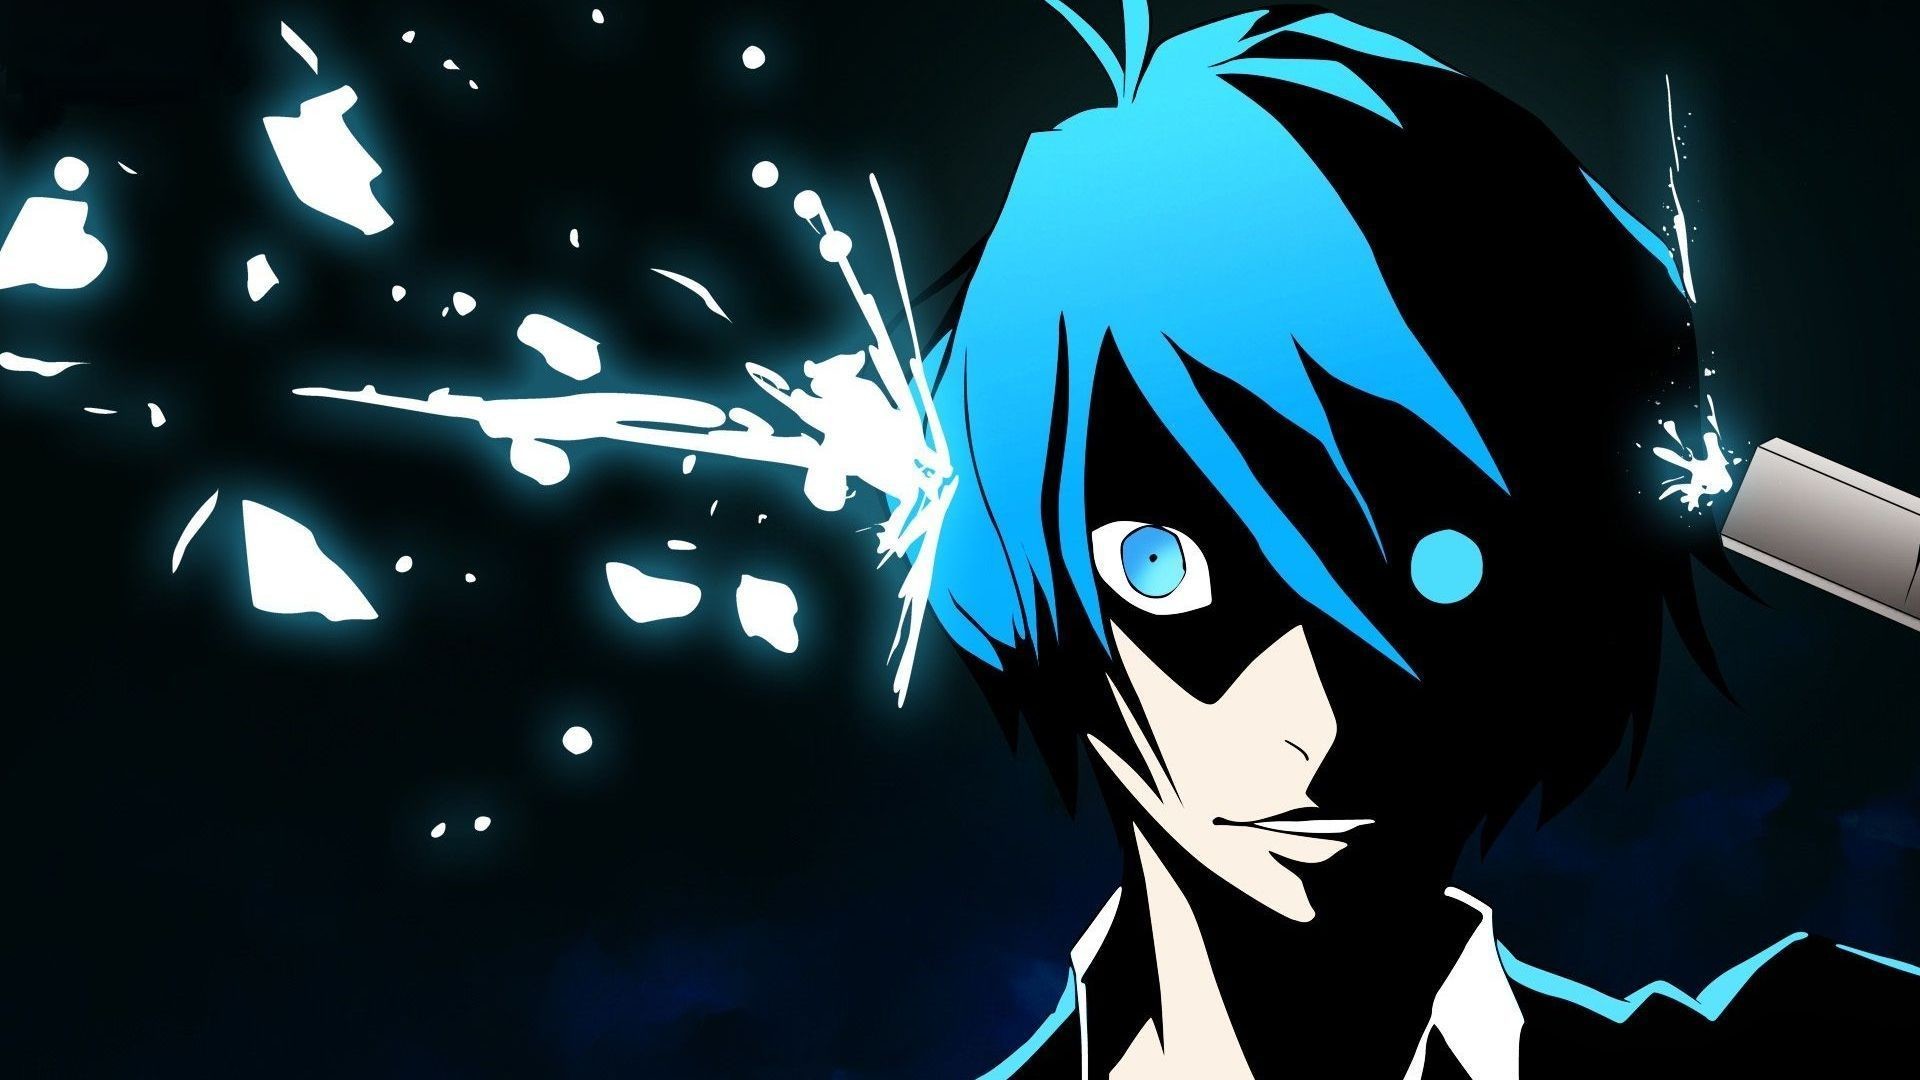 1920x1080 10.01.15, Persona 3 Wallpapers, Persona 3 {HP} Backgrounds - Pack